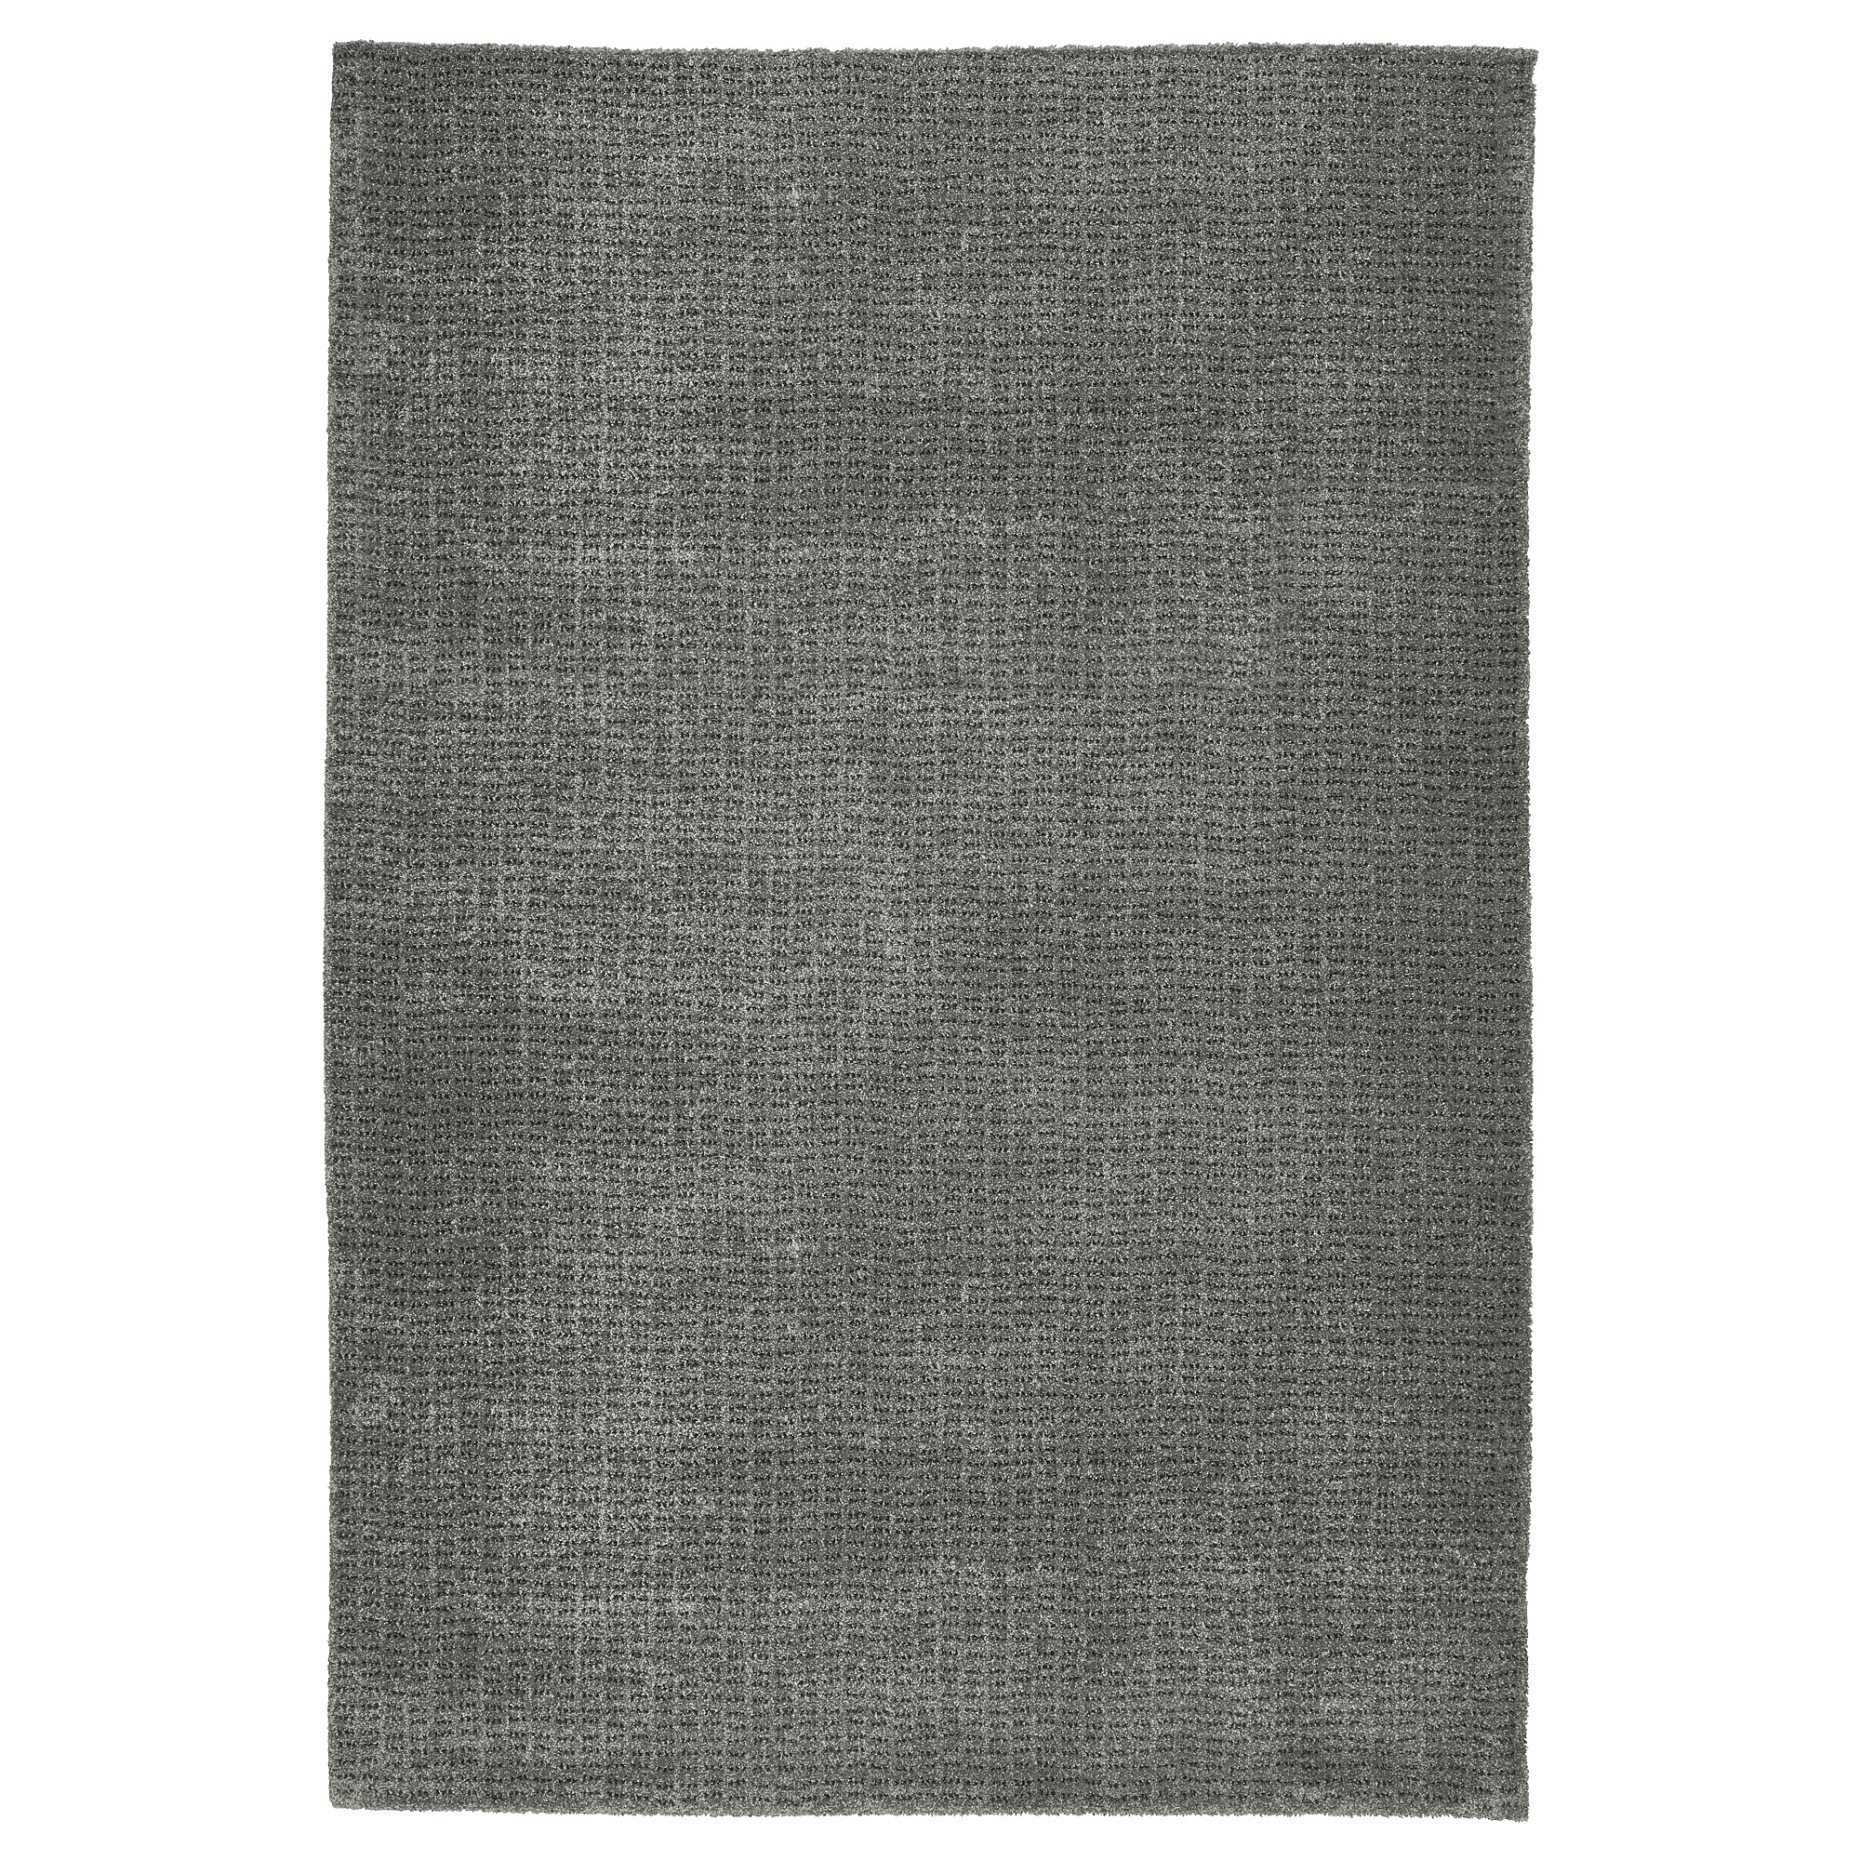 LANGSTED, rug low pile, 133x195 cm, 204.459.39